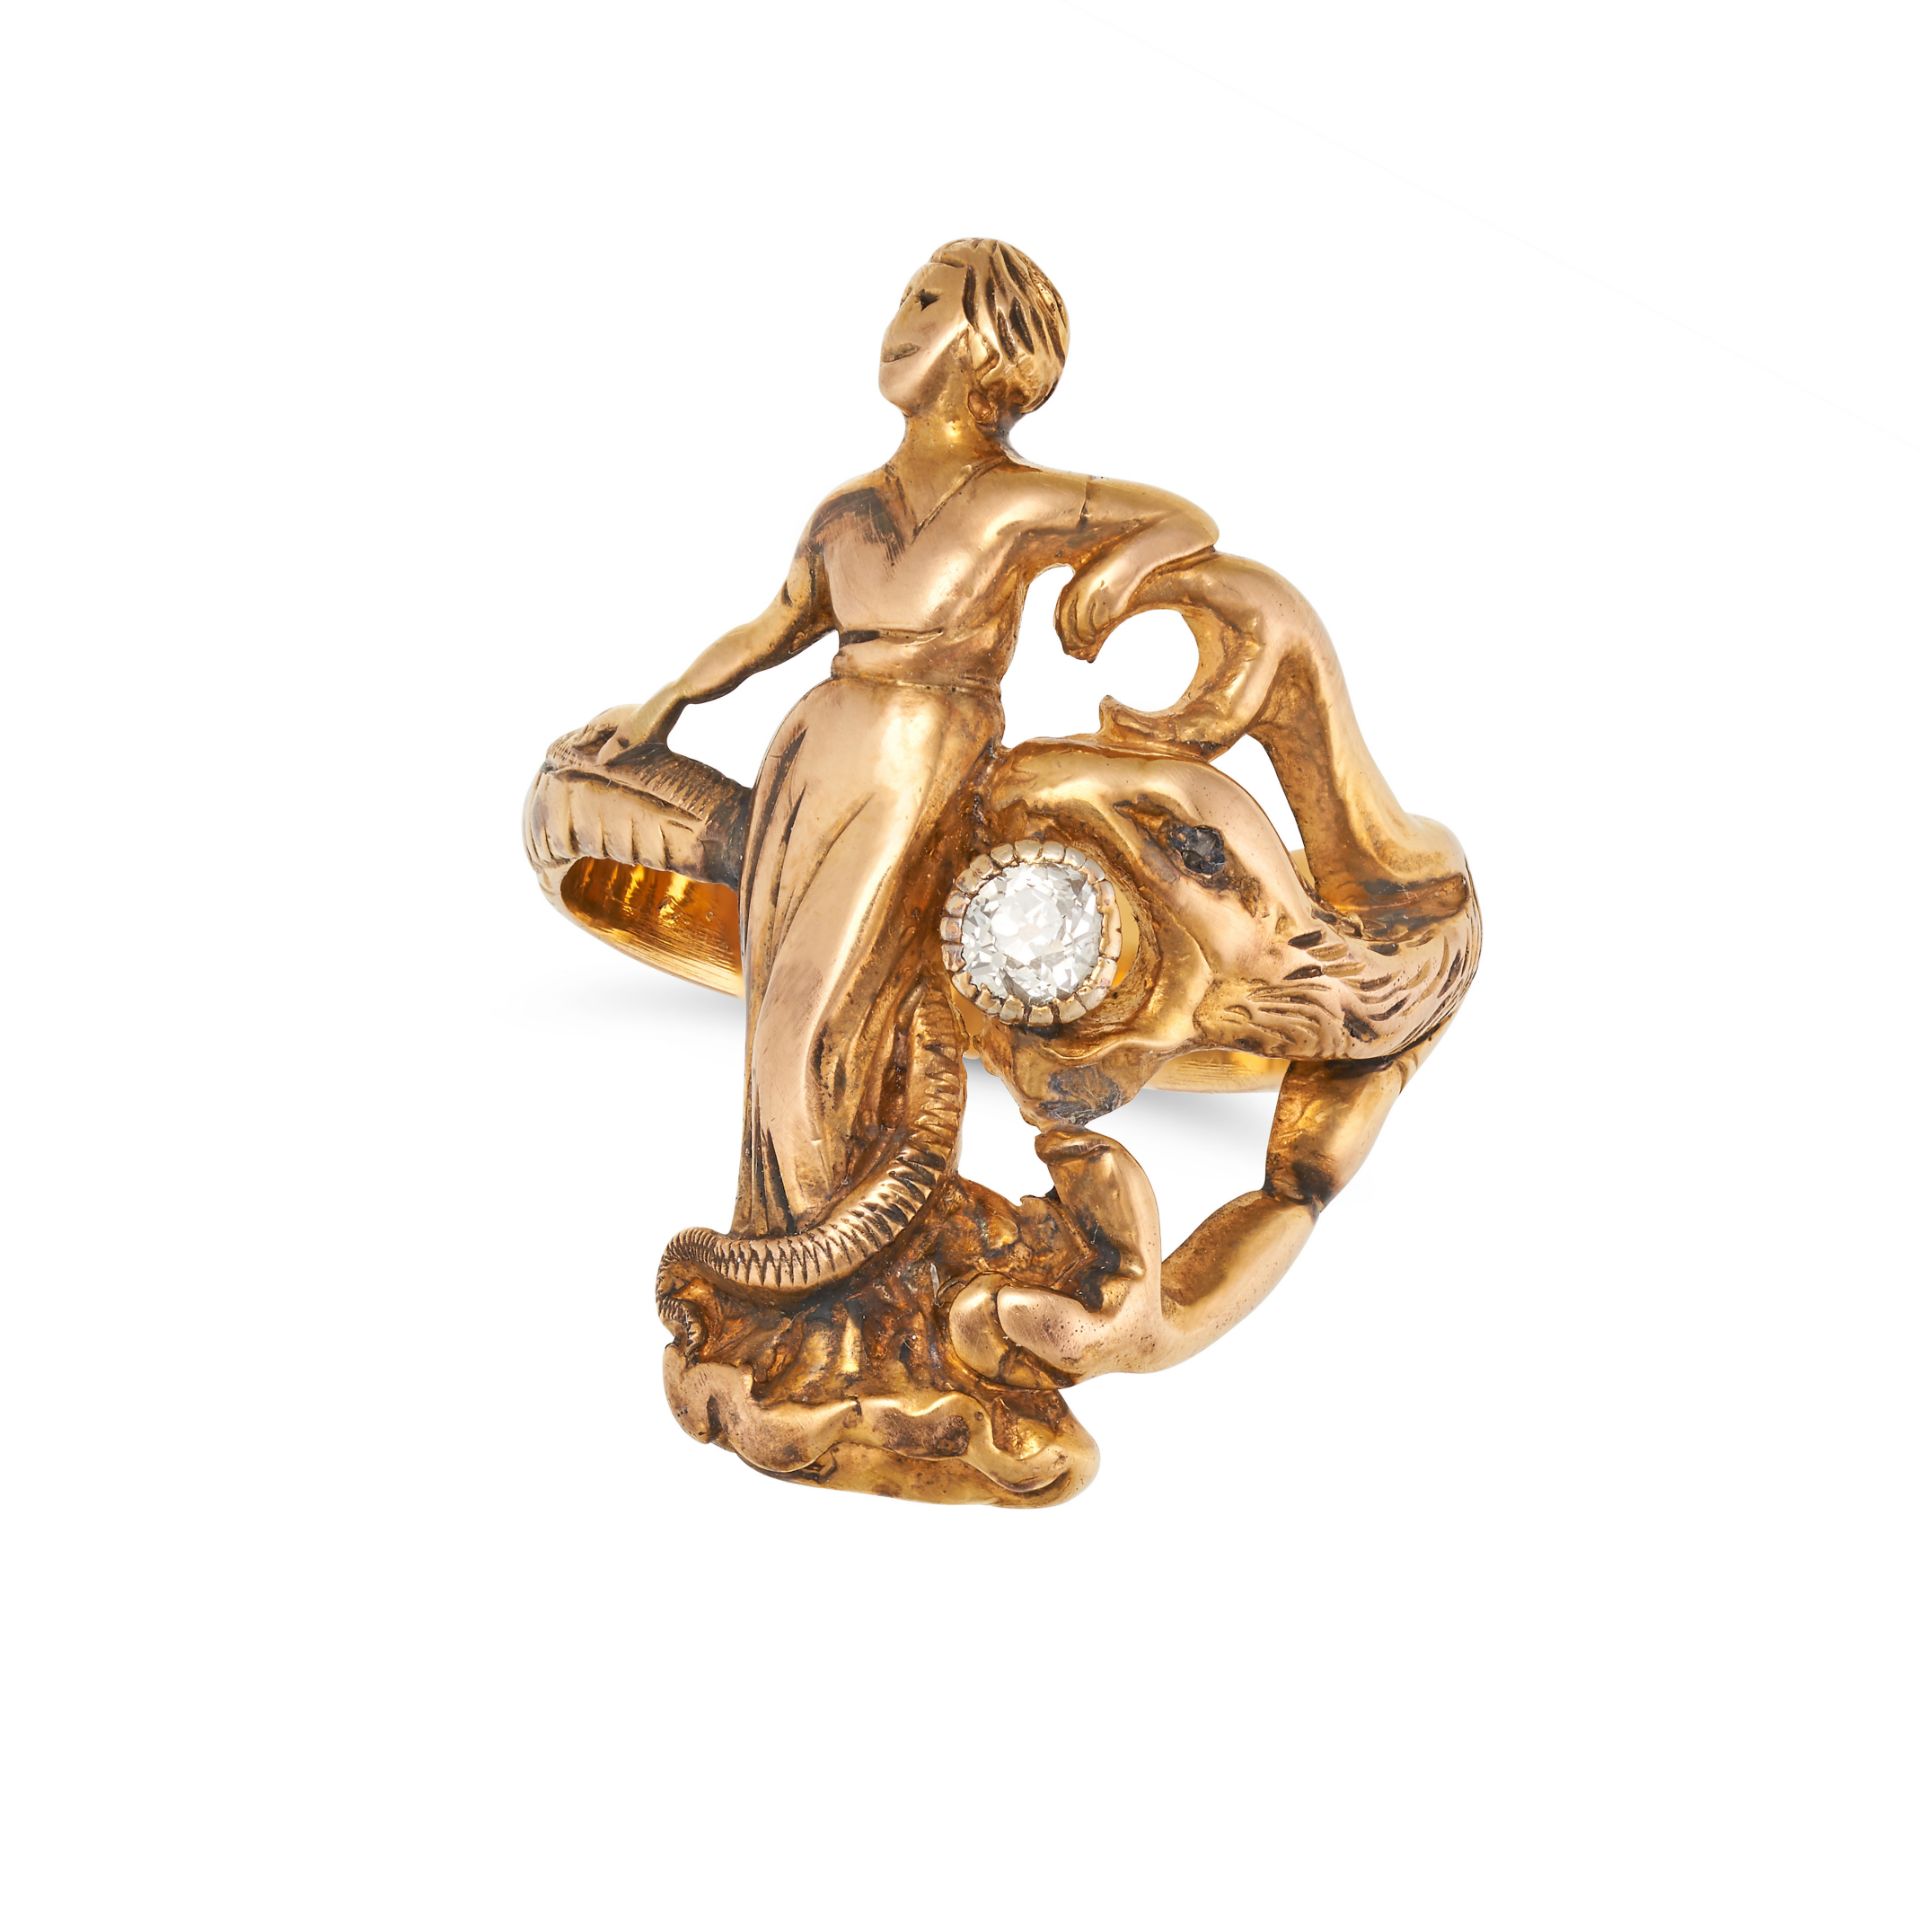 AN ART NOUVEAU DIAMOND SNAKE RING designed as a snake coiled around the figure of a woman, the sn...